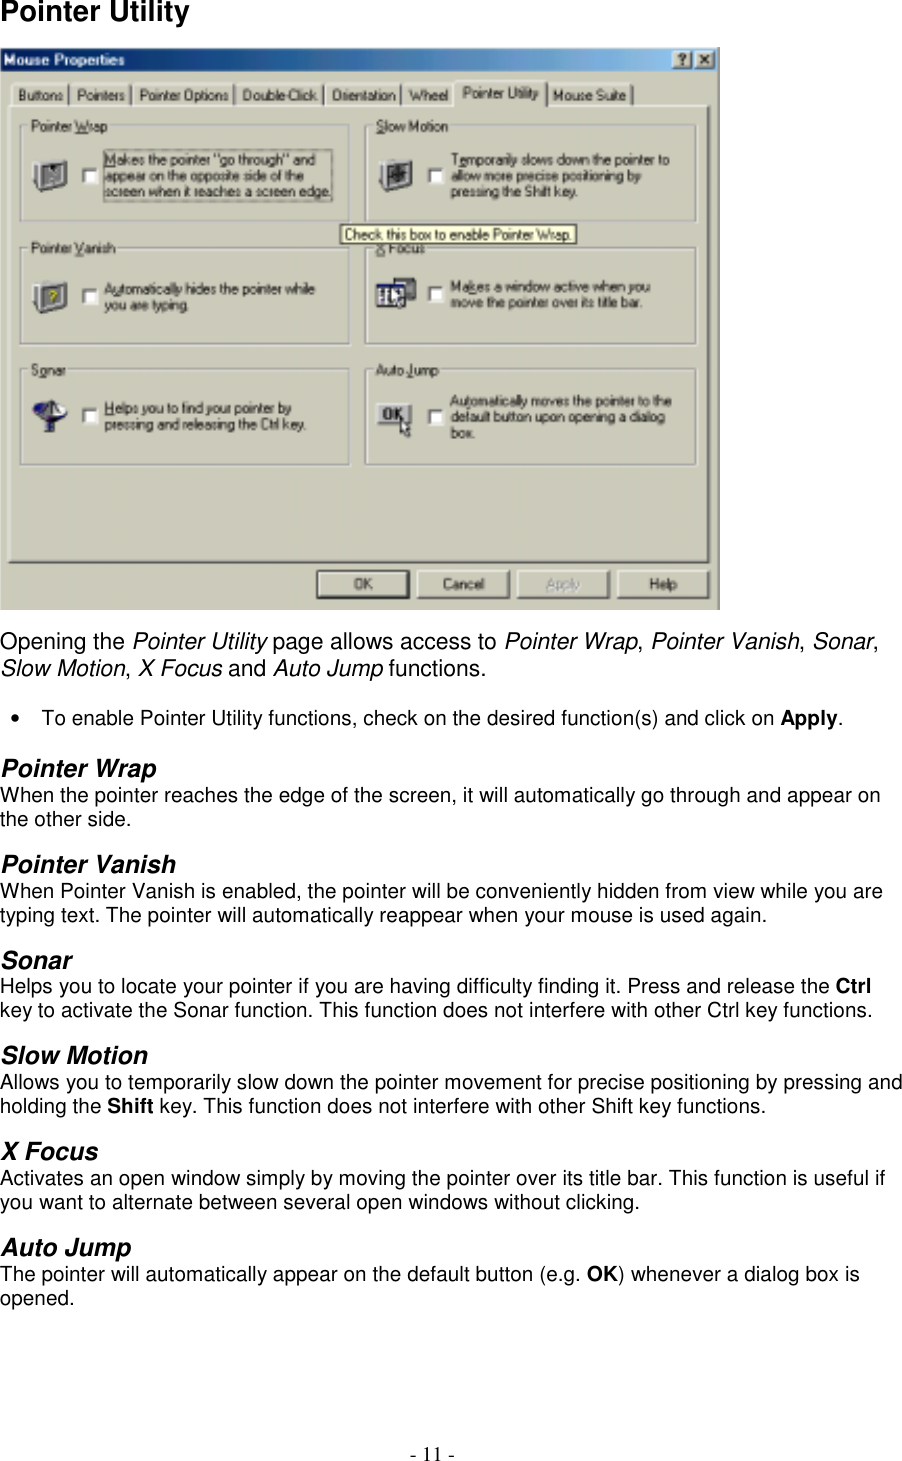 - 11 -Pointer UtilityOpening the Pointer Utility page allows access to Pointer Wrap, Pointer Vanish, Sonar,Slow Motion, X Focus and Auto Jump functions.•  To enable Pointer Utility functions, check on the desired function(s) and click on Apply.Pointer WrapWhen the pointer reaches the edge of the screen, it will automatically go through and appear onthe other side.Pointer VanishWhen Pointer Vanish is enabled, the pointer will be conveniently hidden from view while you aretyping text. The pointer will automatically reappear when your mouse is used again.SonarHelps you to locate your pointer if you are having difficulty finding it. Press and release the Ctrlkey to activate the Sonar function. This function does not interfere with other Ctrl key functions.Slow MotionAllows you to temporarily slow down the pointer movement for precise positioning by pressing andholding the Shift key. This function does not interfere with other Shift key functions.X FocusActivates an open window simply by moving the pointer over its title bar. This function is useful ifyou want to alternate between several open windows without clicking.Auto JumpThe pointer will automatically appear on the default button (e.g. OK) whenever a dialog box isopened.